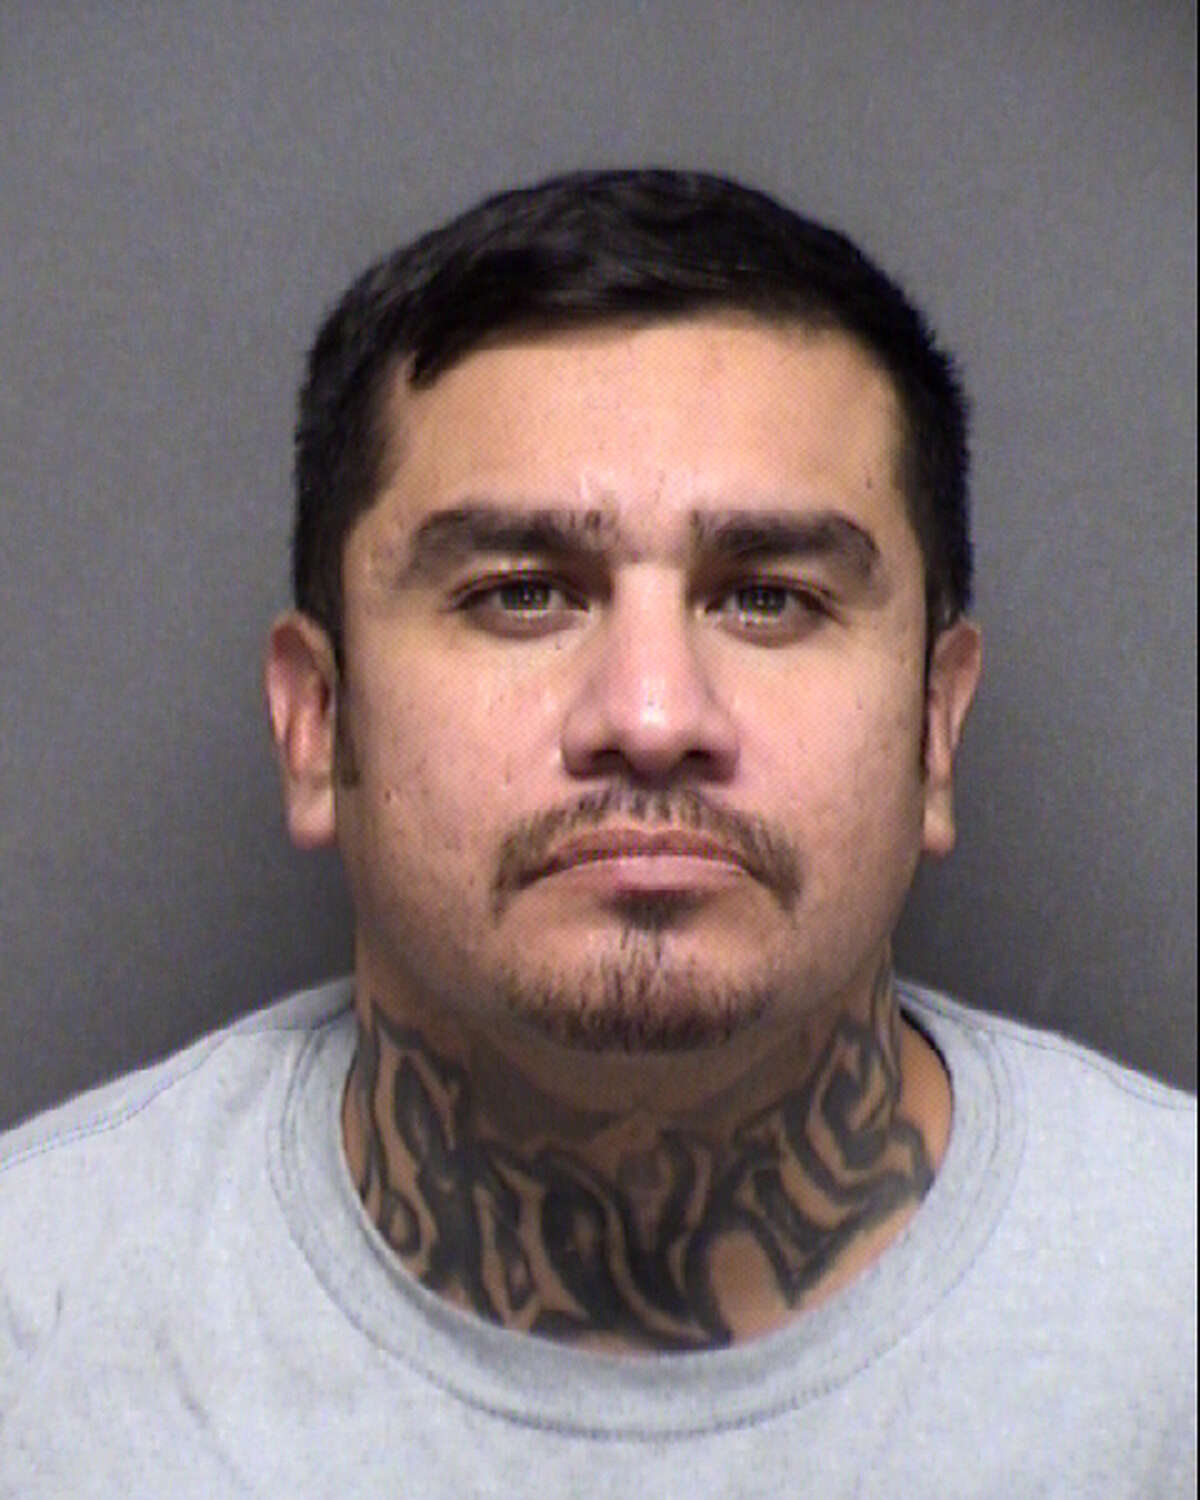 Fernando Rojas, 38, was charged with one count of murder and two counts of aggravated assault with a deadly weapon.